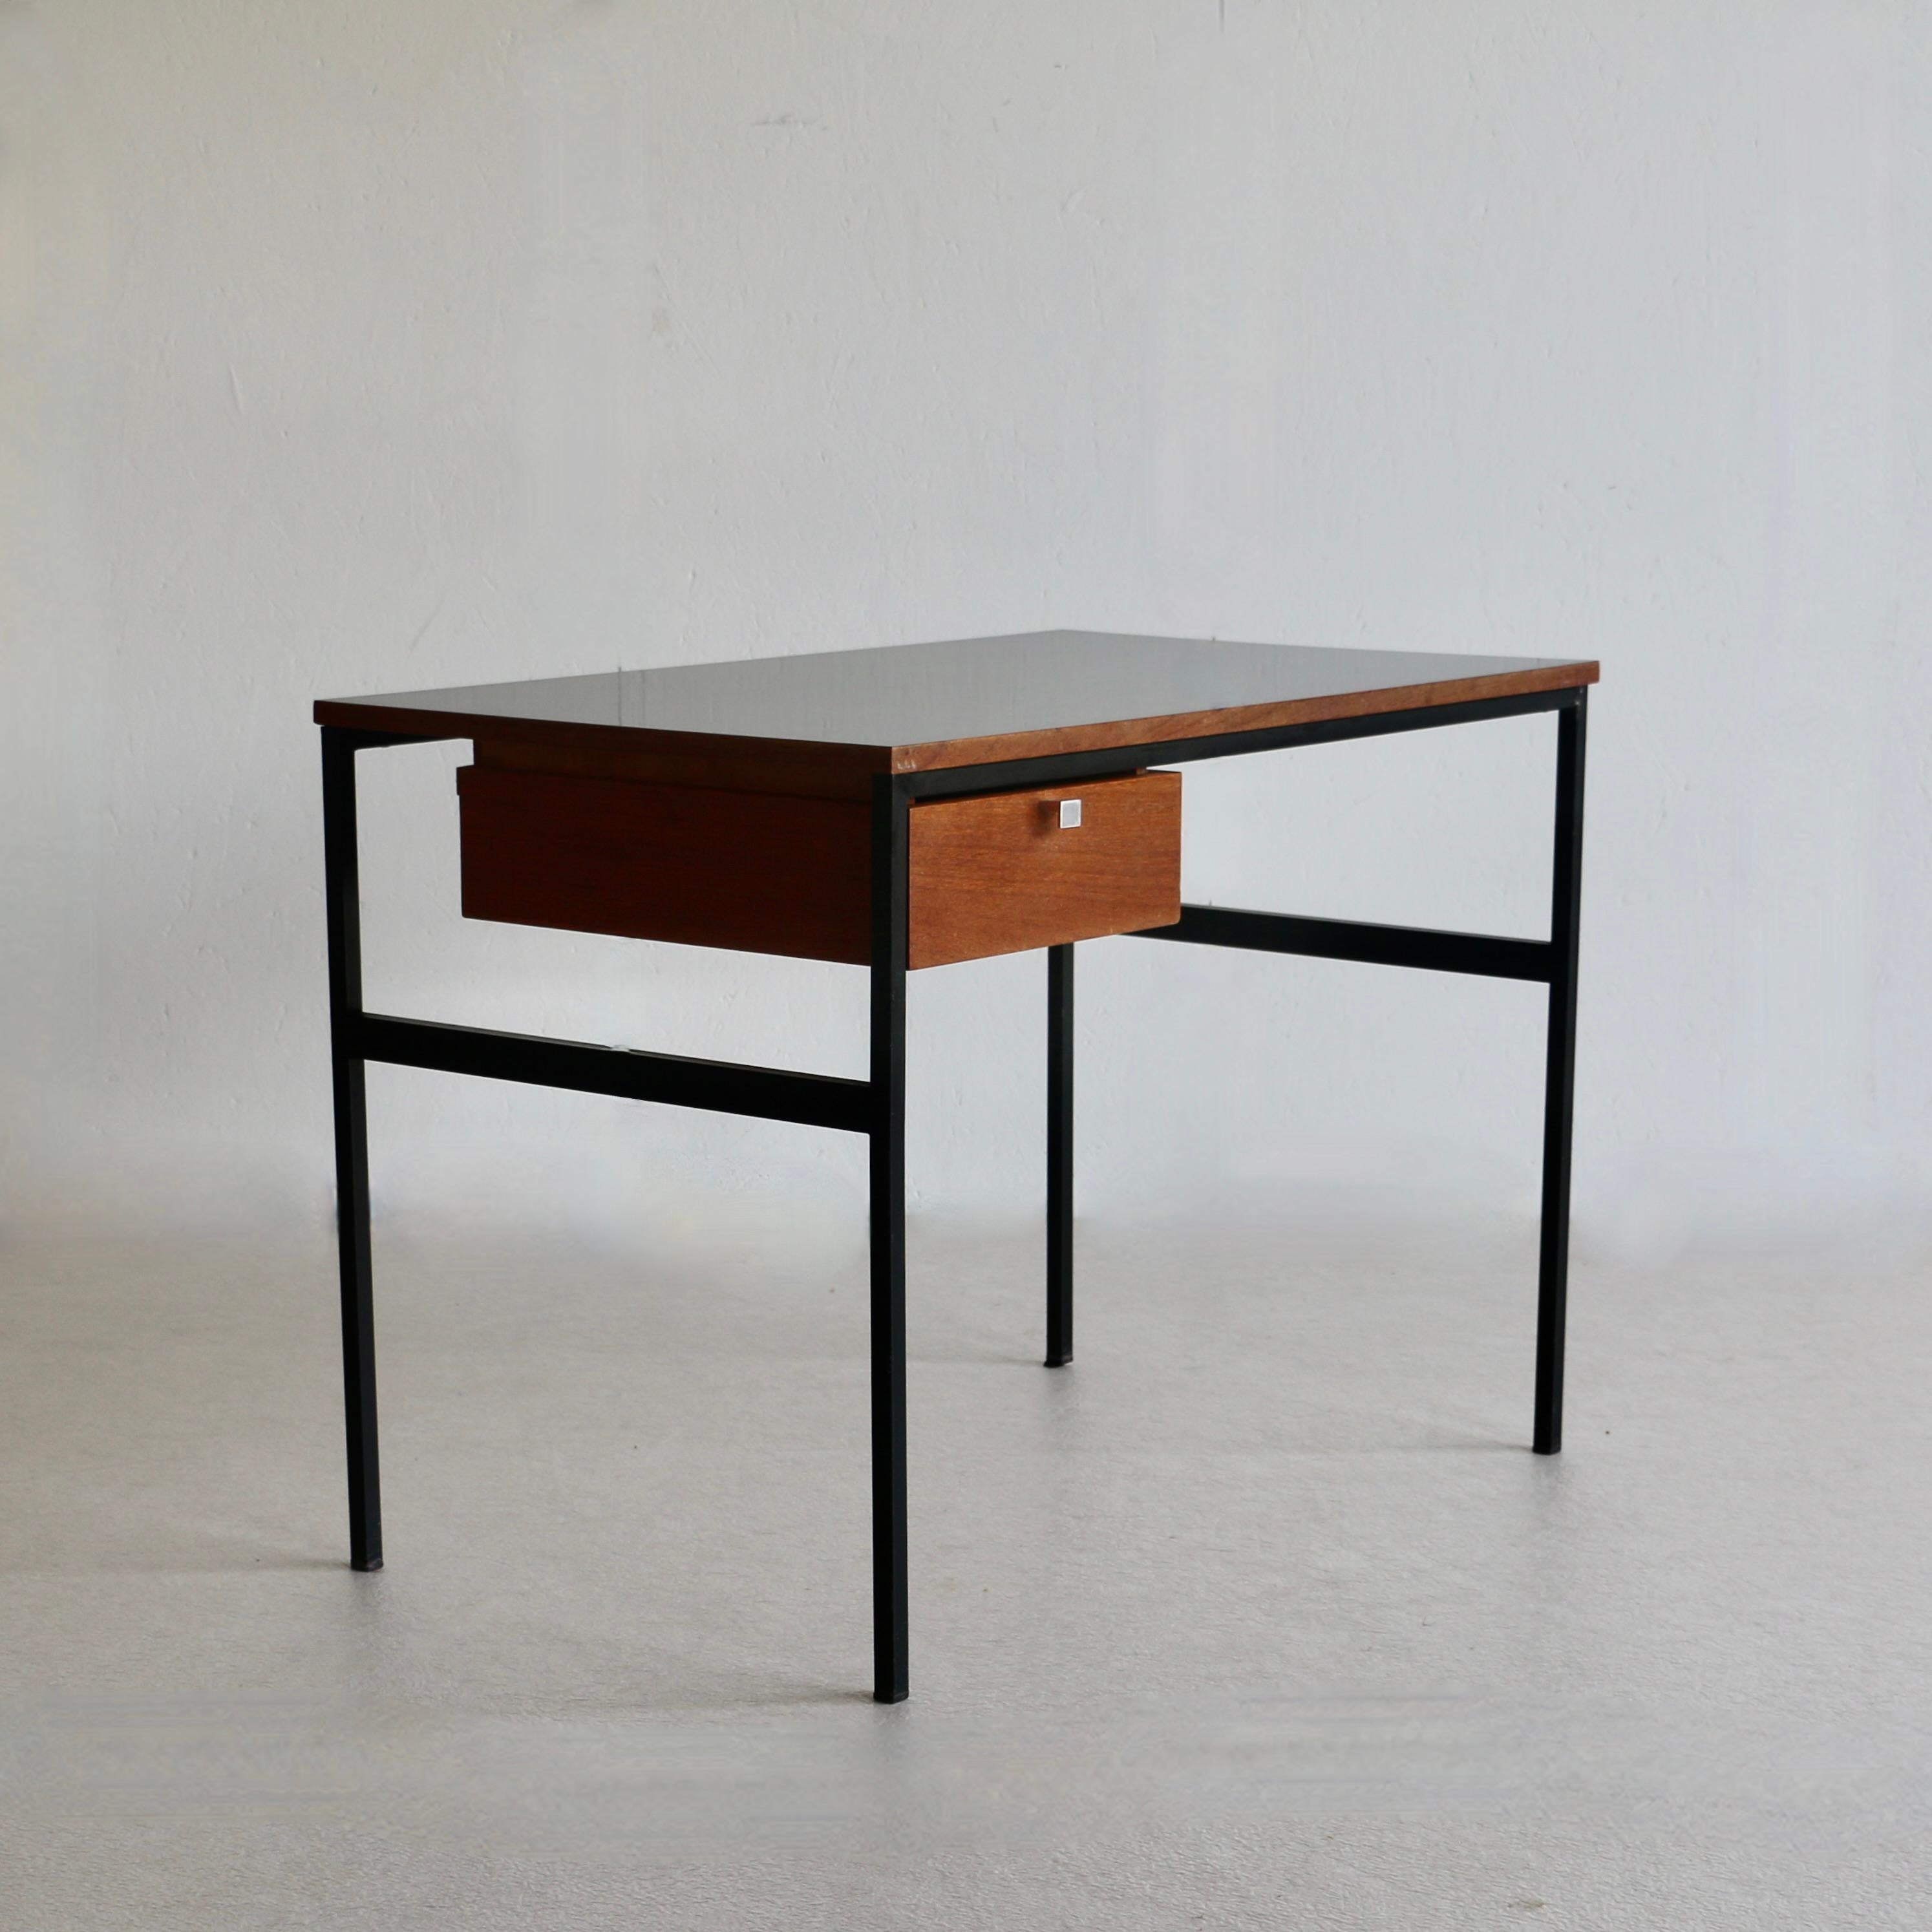 A Pierre Paulin (1922-2009) model CM 217 desk with square tubular legs in black lacquered metal on which rests a plywood top covered with black laminate, suspended pedestal opening with a teak drawer France Edition Thonet 1962.